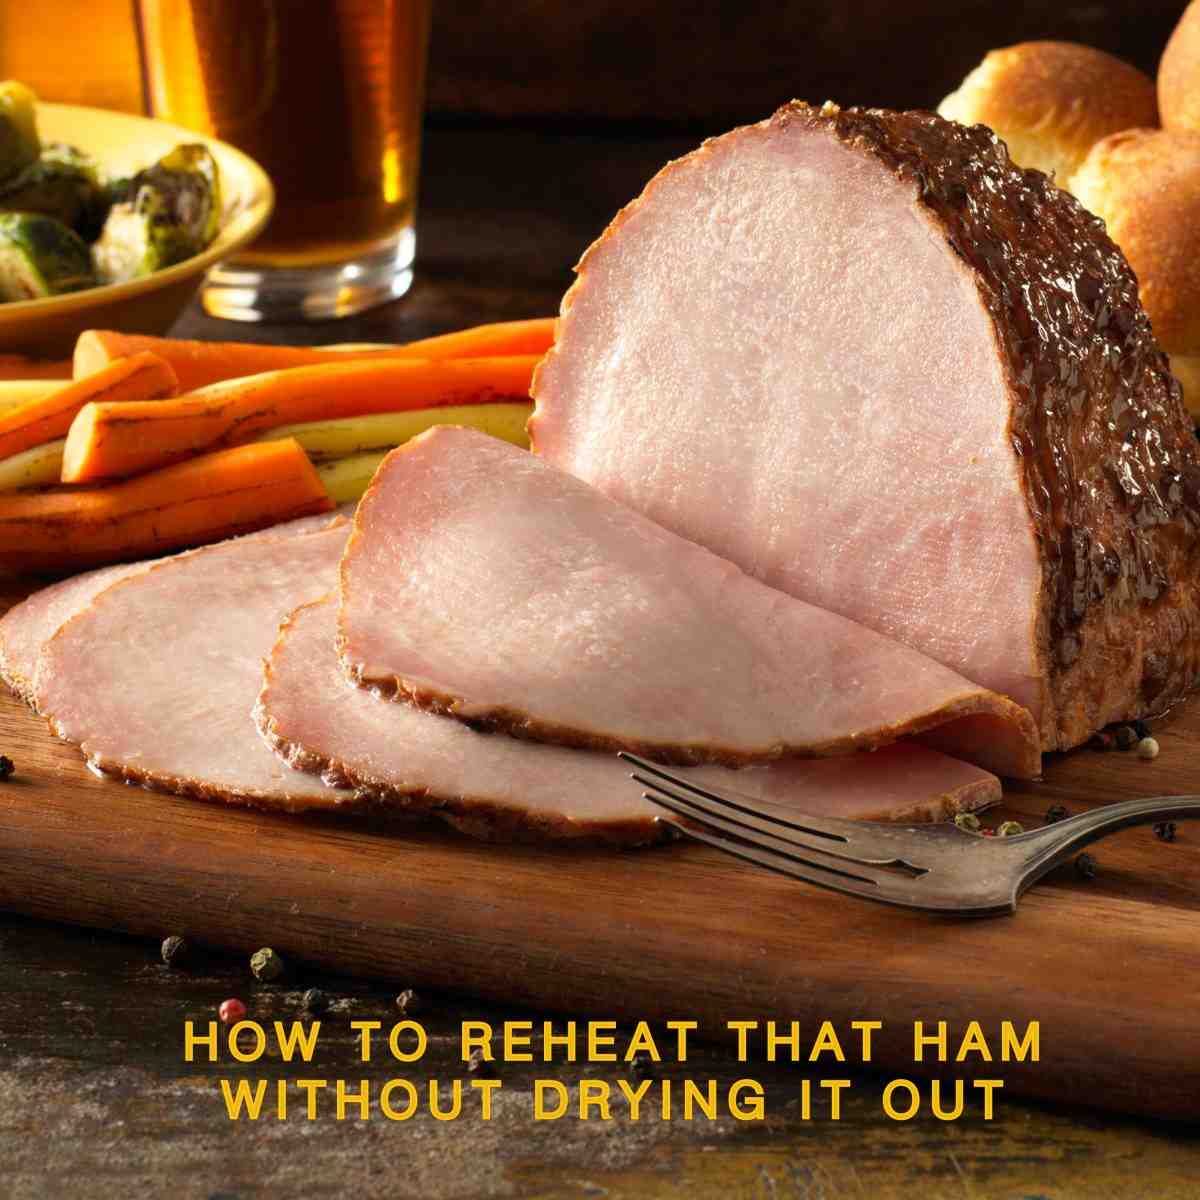 How long do you cook a ham that's already precooked?